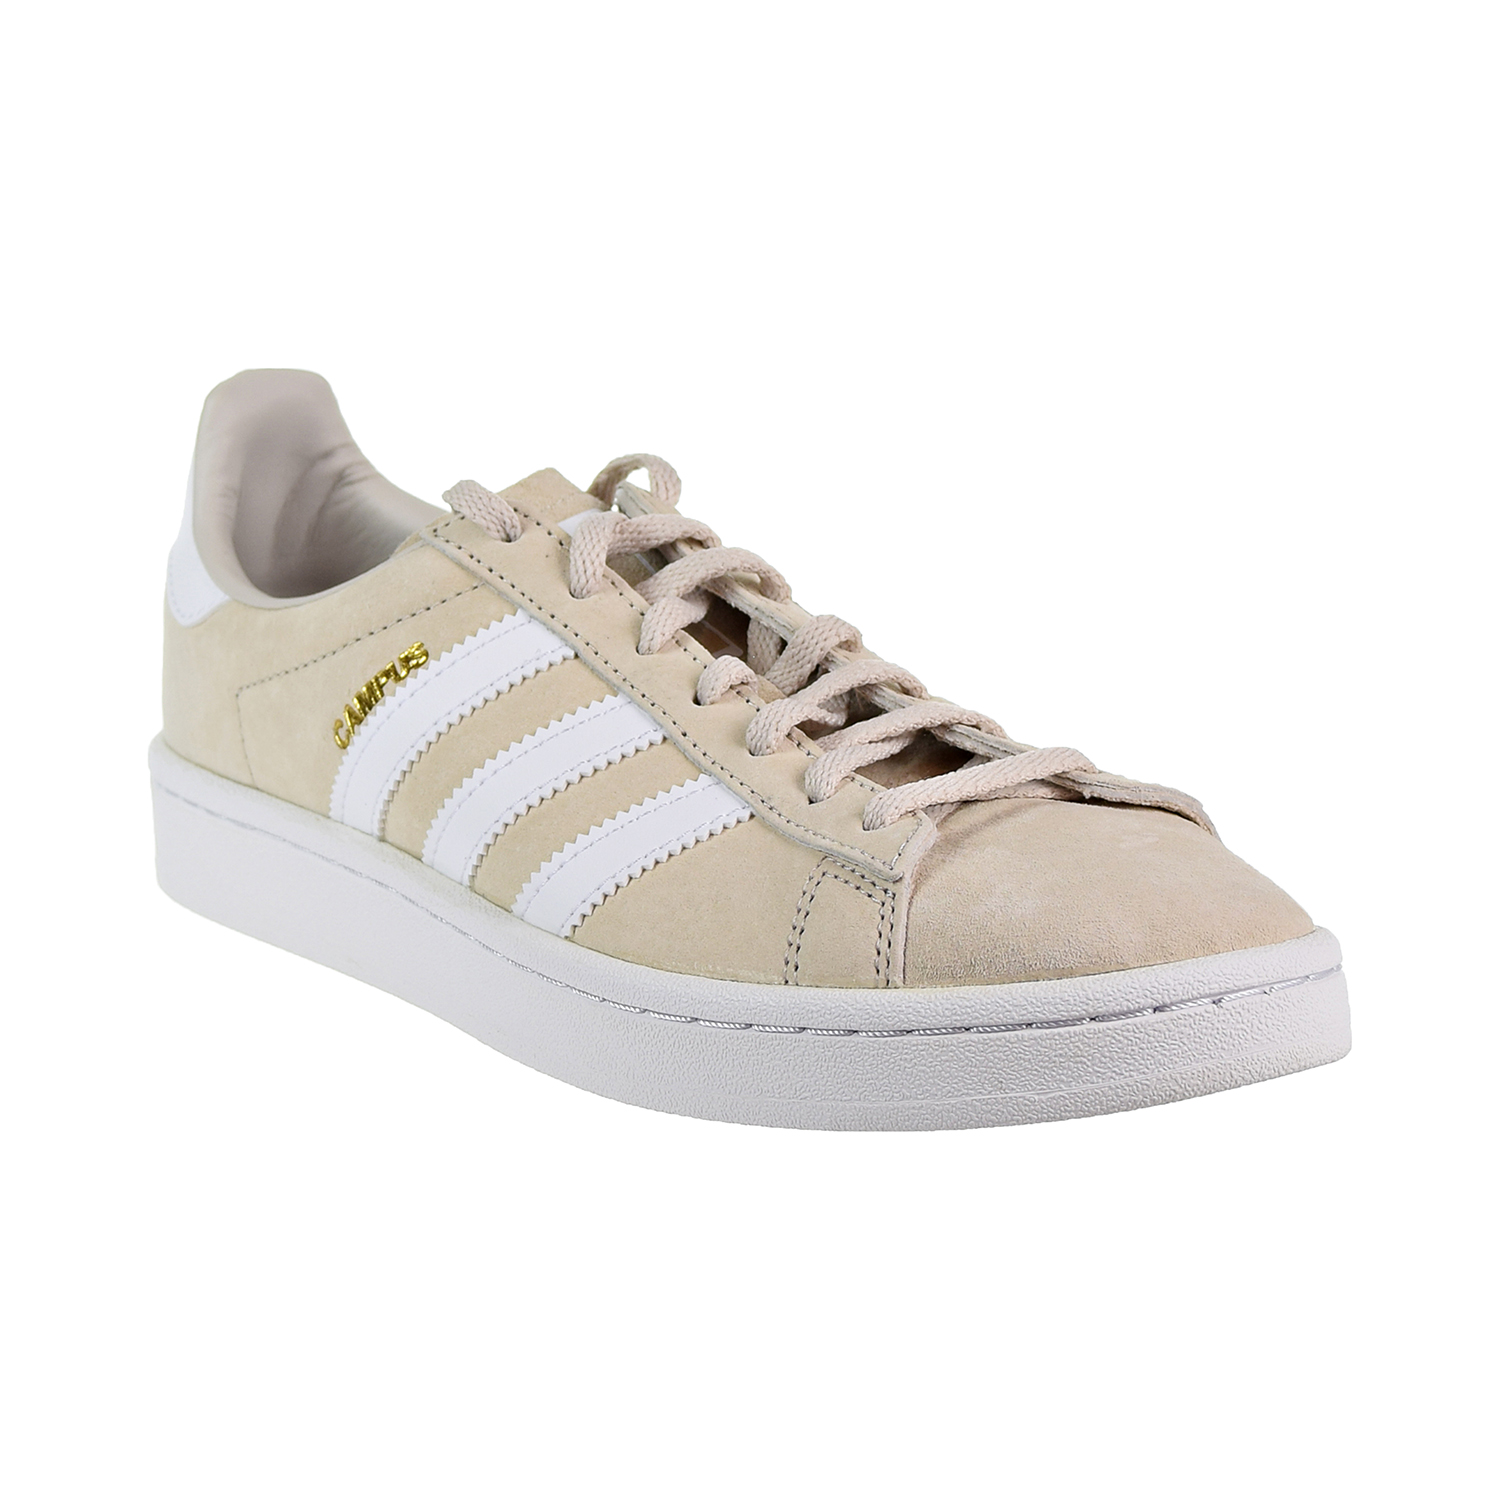 Learning Made of Daughter Adidas Campus Women's Shoes Core Brown-Footwear White-Crystal White by9846